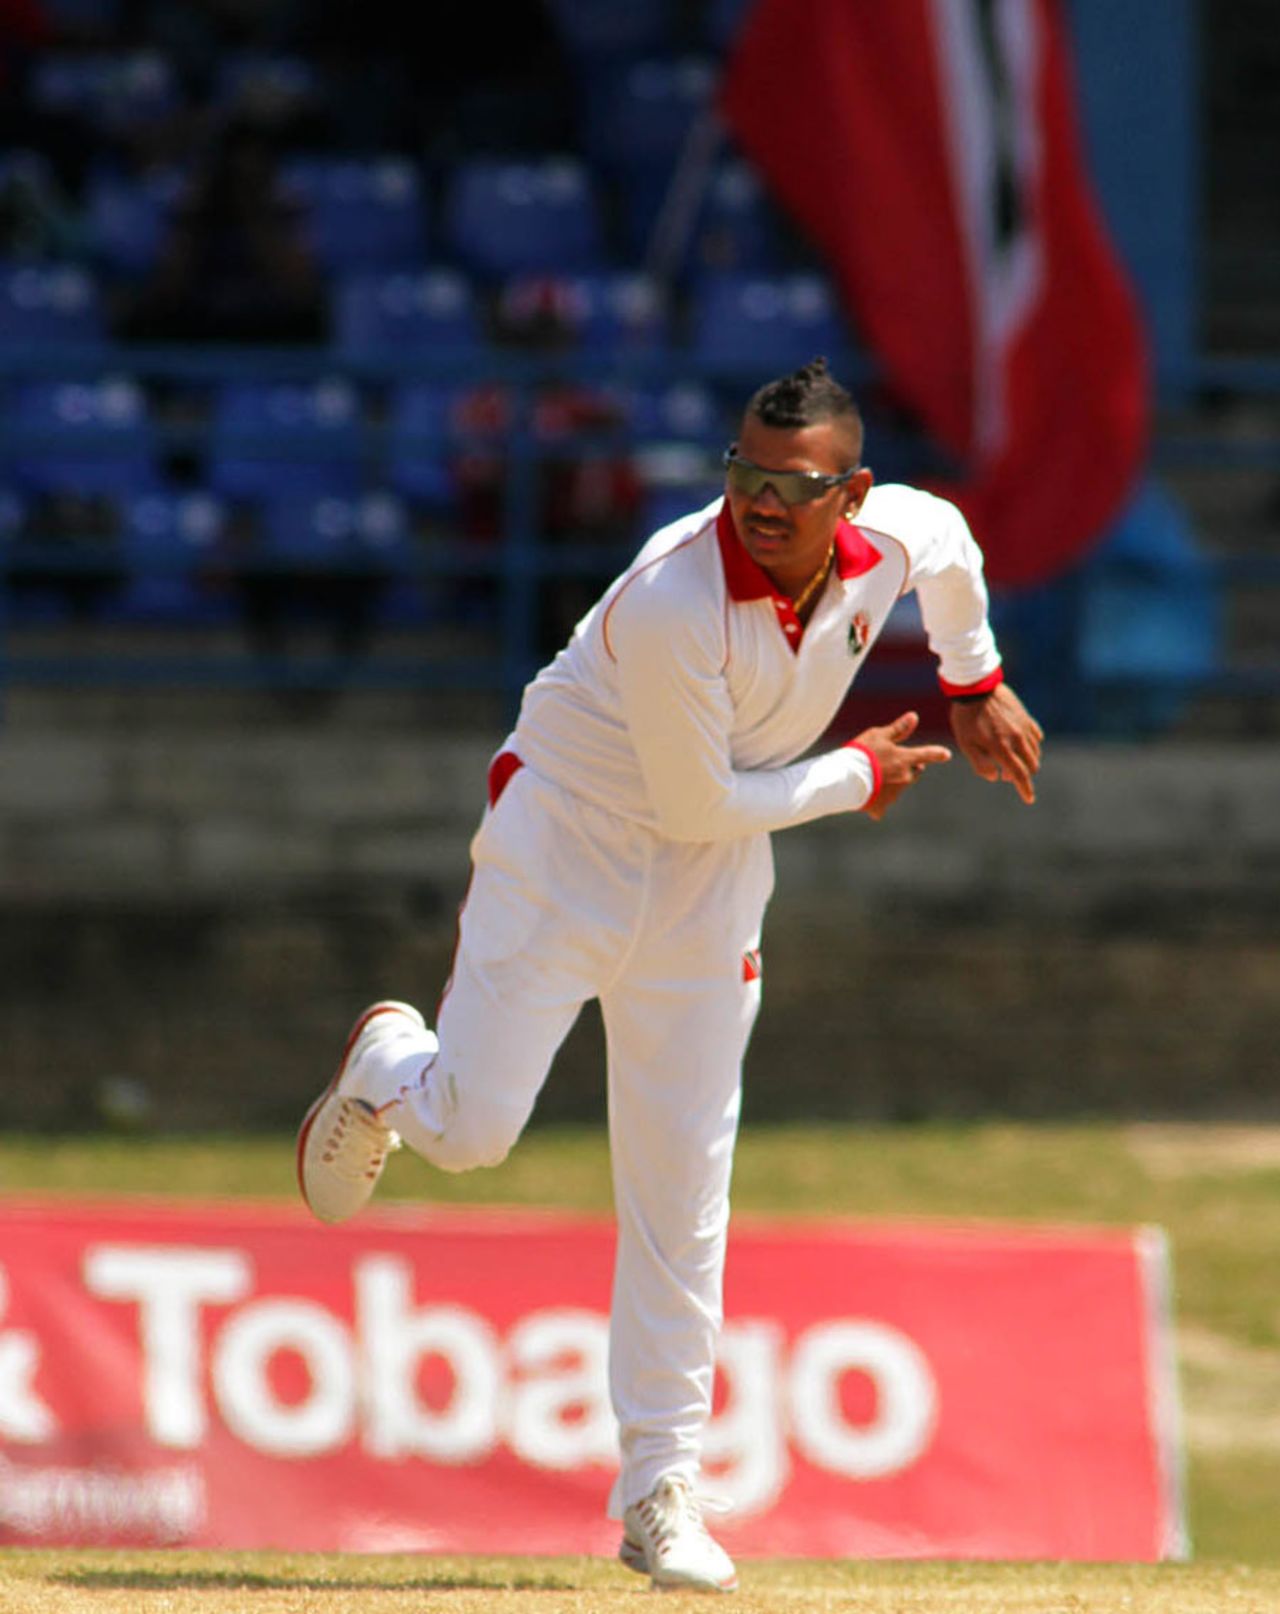 Sunil Narine took ten wickets in the match as Trinidad and Tobago won by 45 runs, Trinidad & Tobago v Guyana, Regional Four Day Competition, Day 4, Port of Spain, March 9, 2013